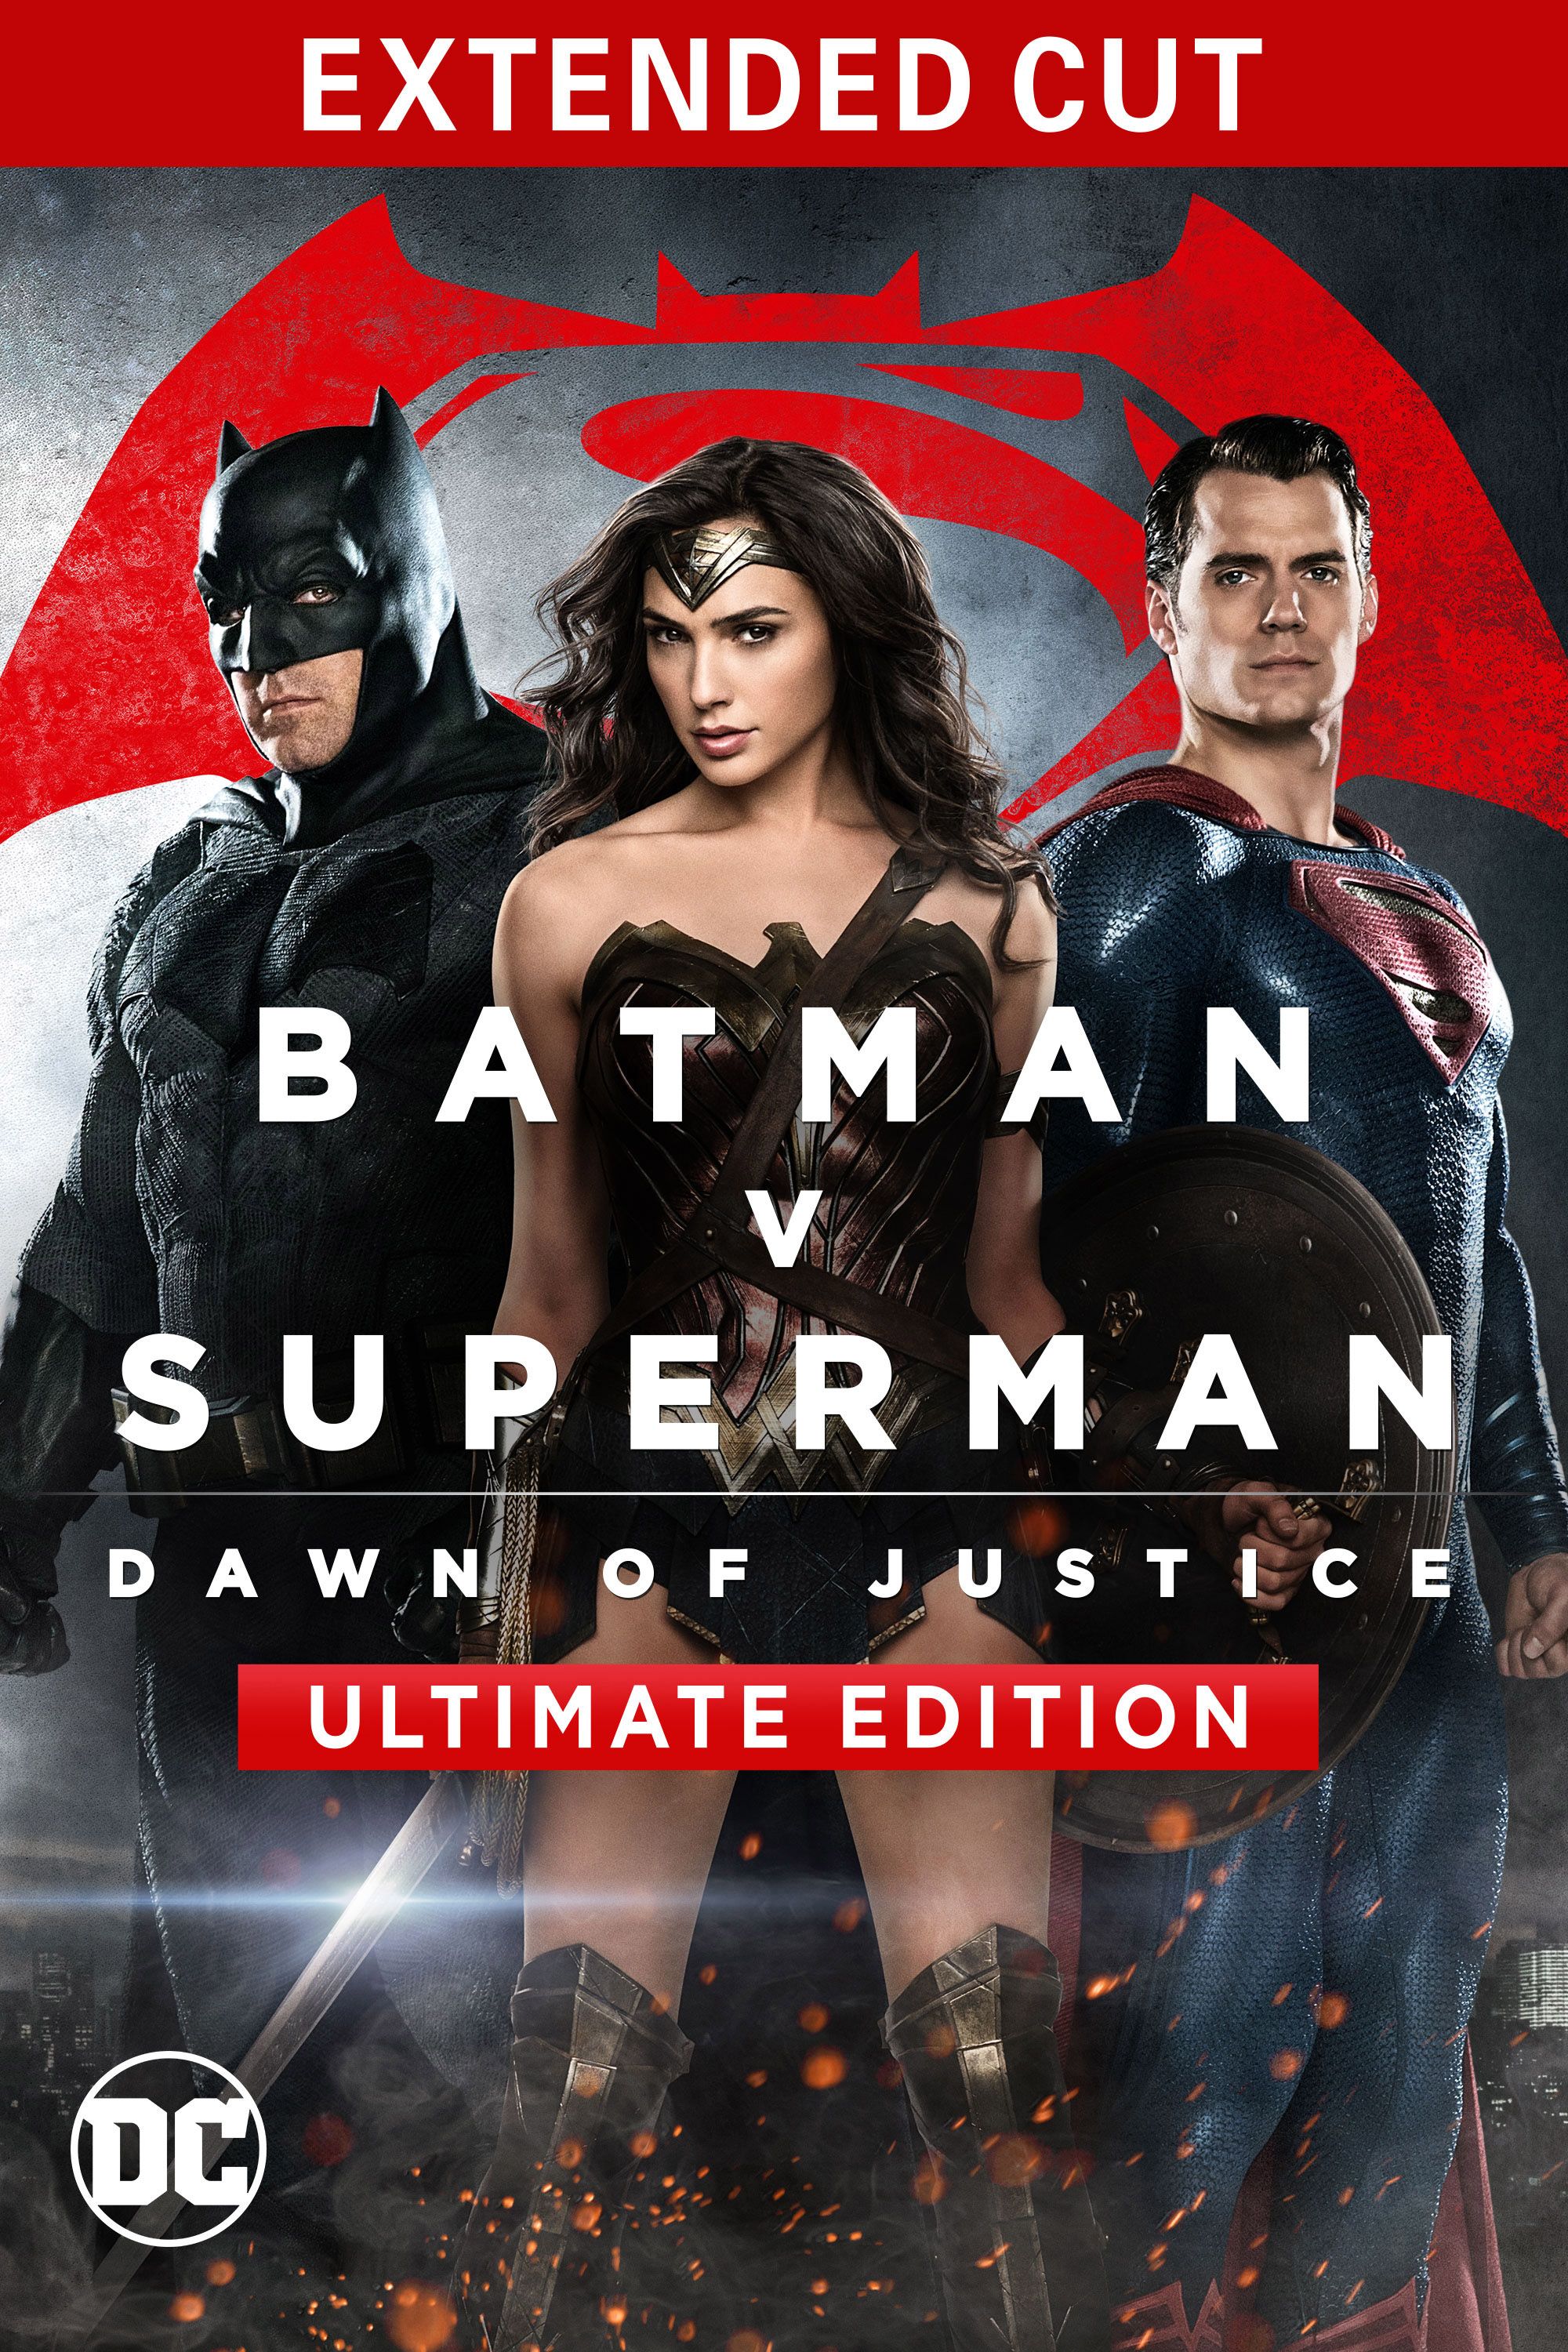 Batman v Superman: Dawn of Justice (Ultimate Edition) | Movies Anywhere